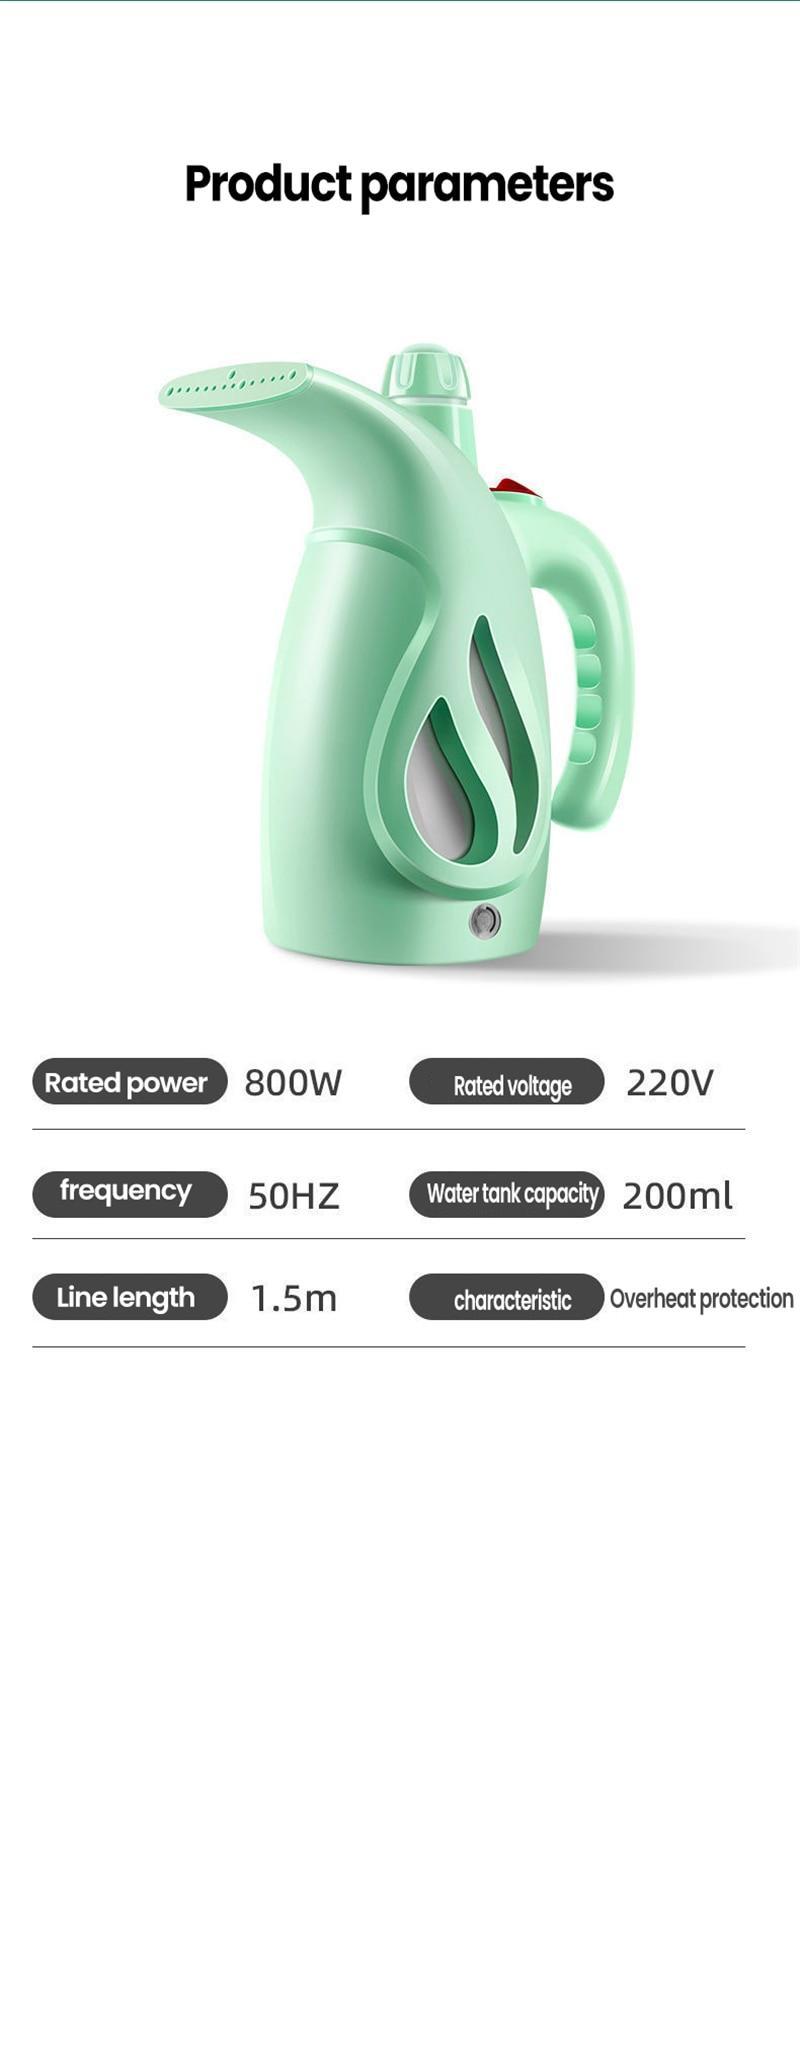 Clothes Steamer Portable Handheld Iron Vertical Garment Steamers Steam Machine Ironing Home Appliances for Home Travel